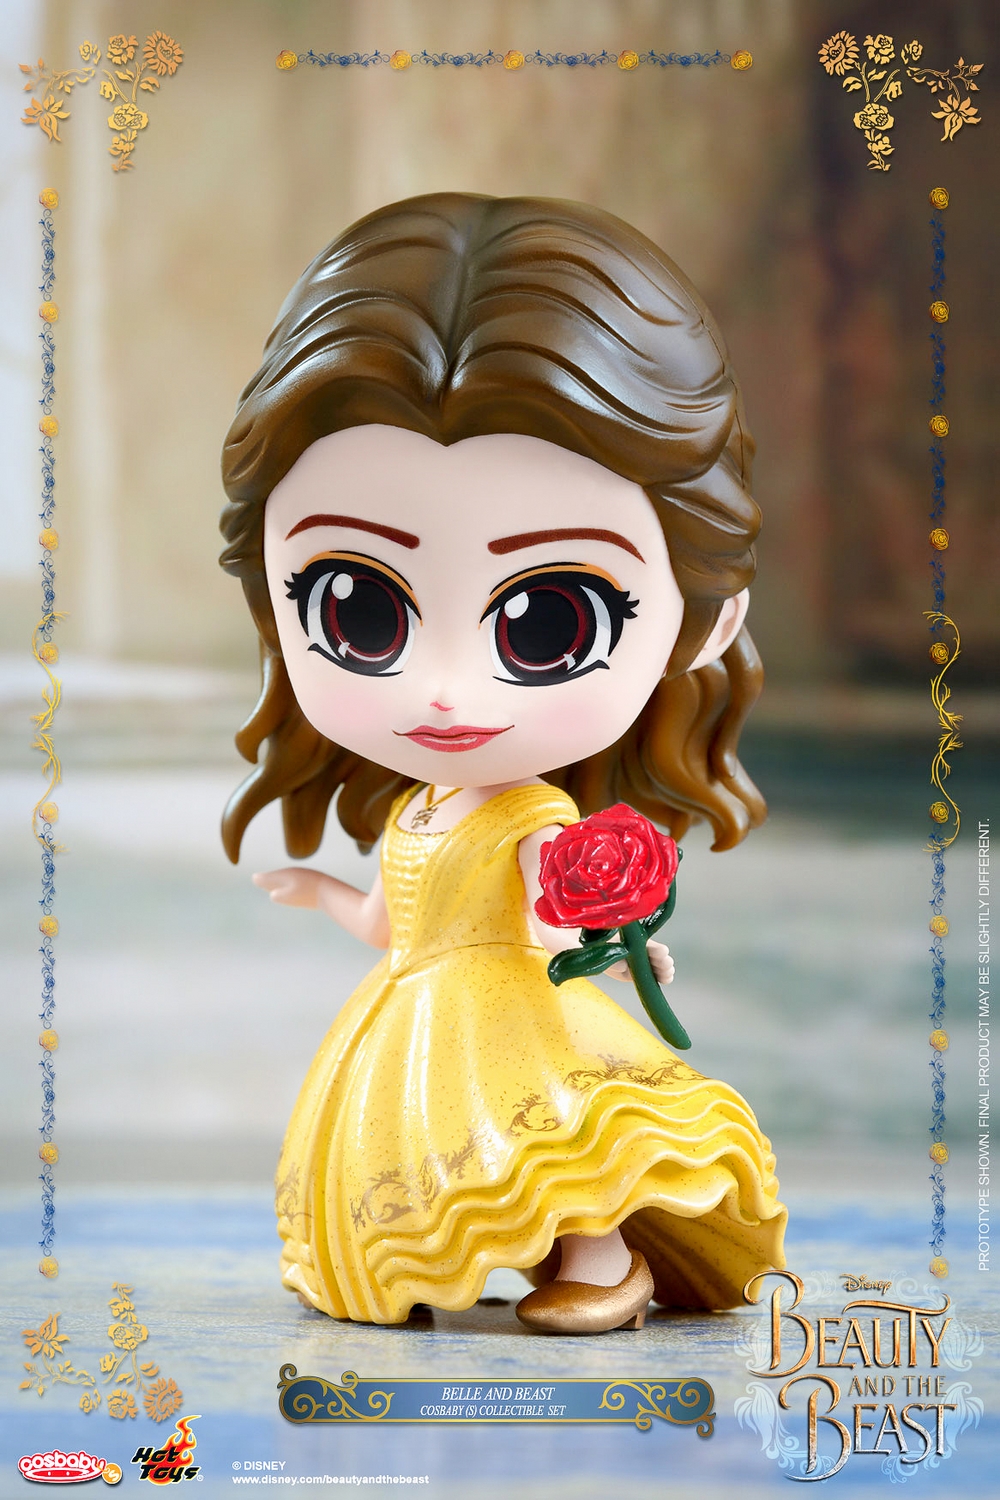 Hot-Toys-COSB352-353-Beauty-and-the-Beast-Cosbaby-009.jpg